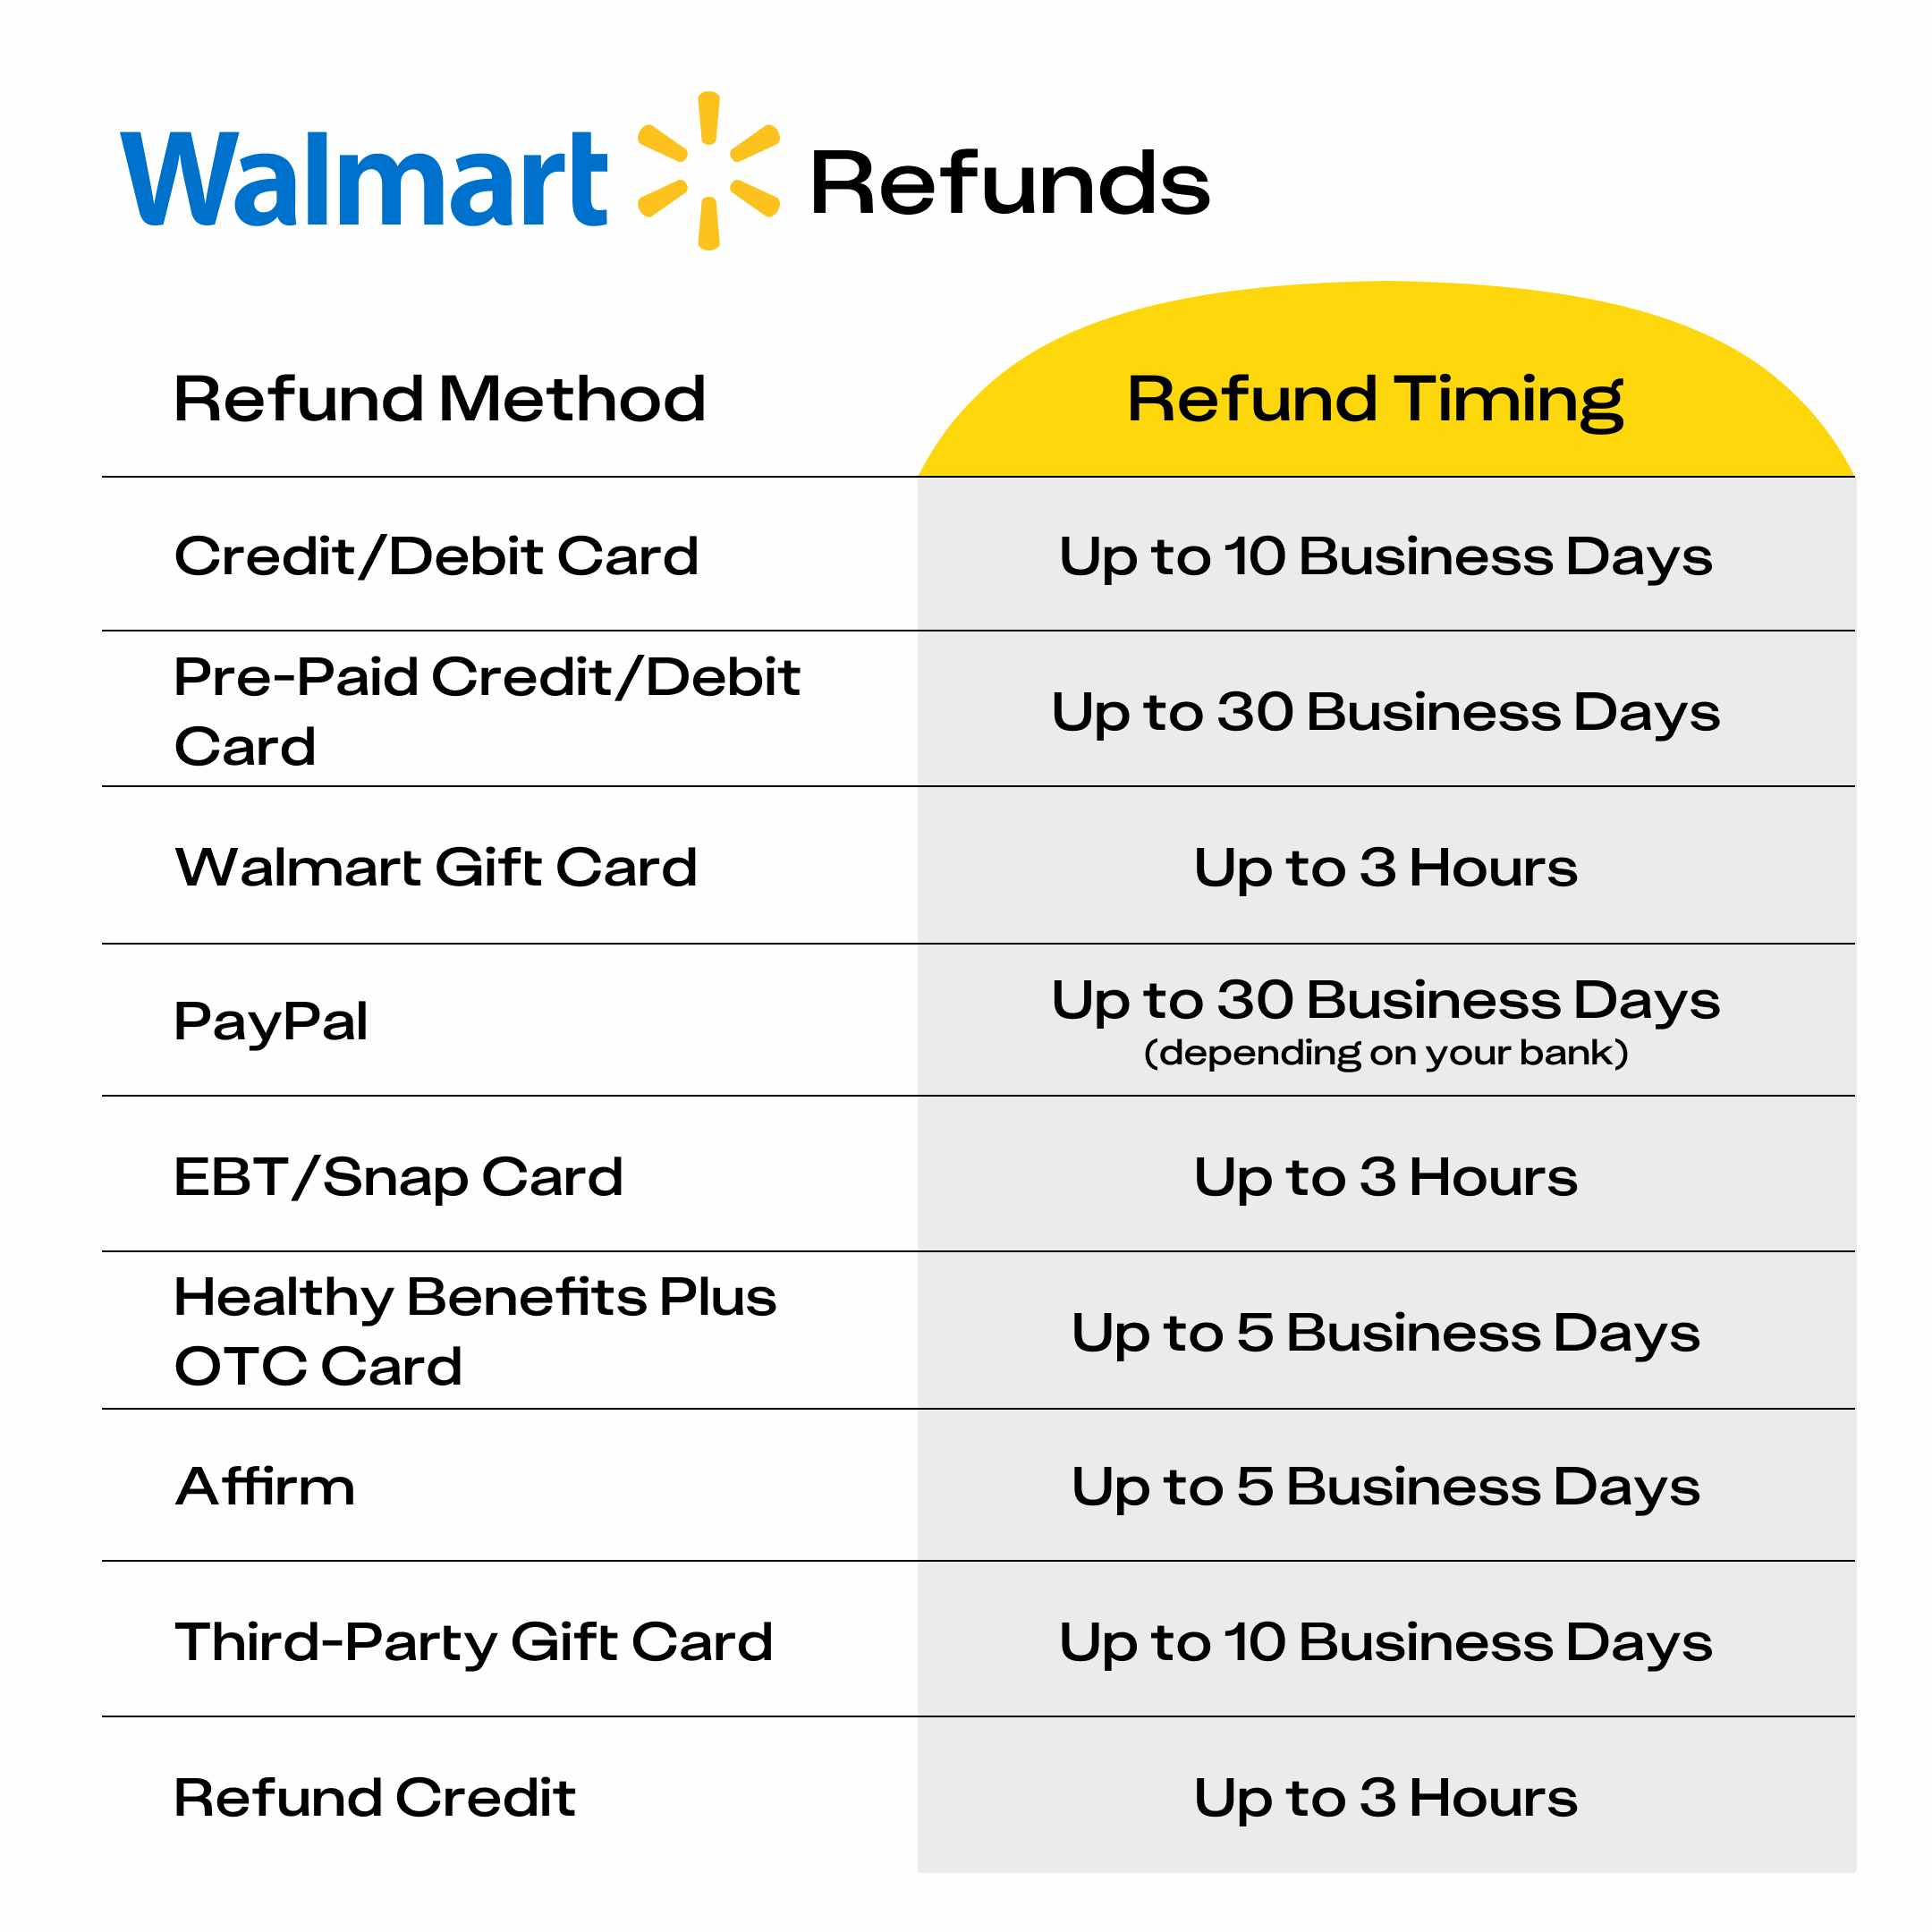 how long it takes to get your walmart refund based on the refund method you choose: credit card, debit card, gift card, etc.